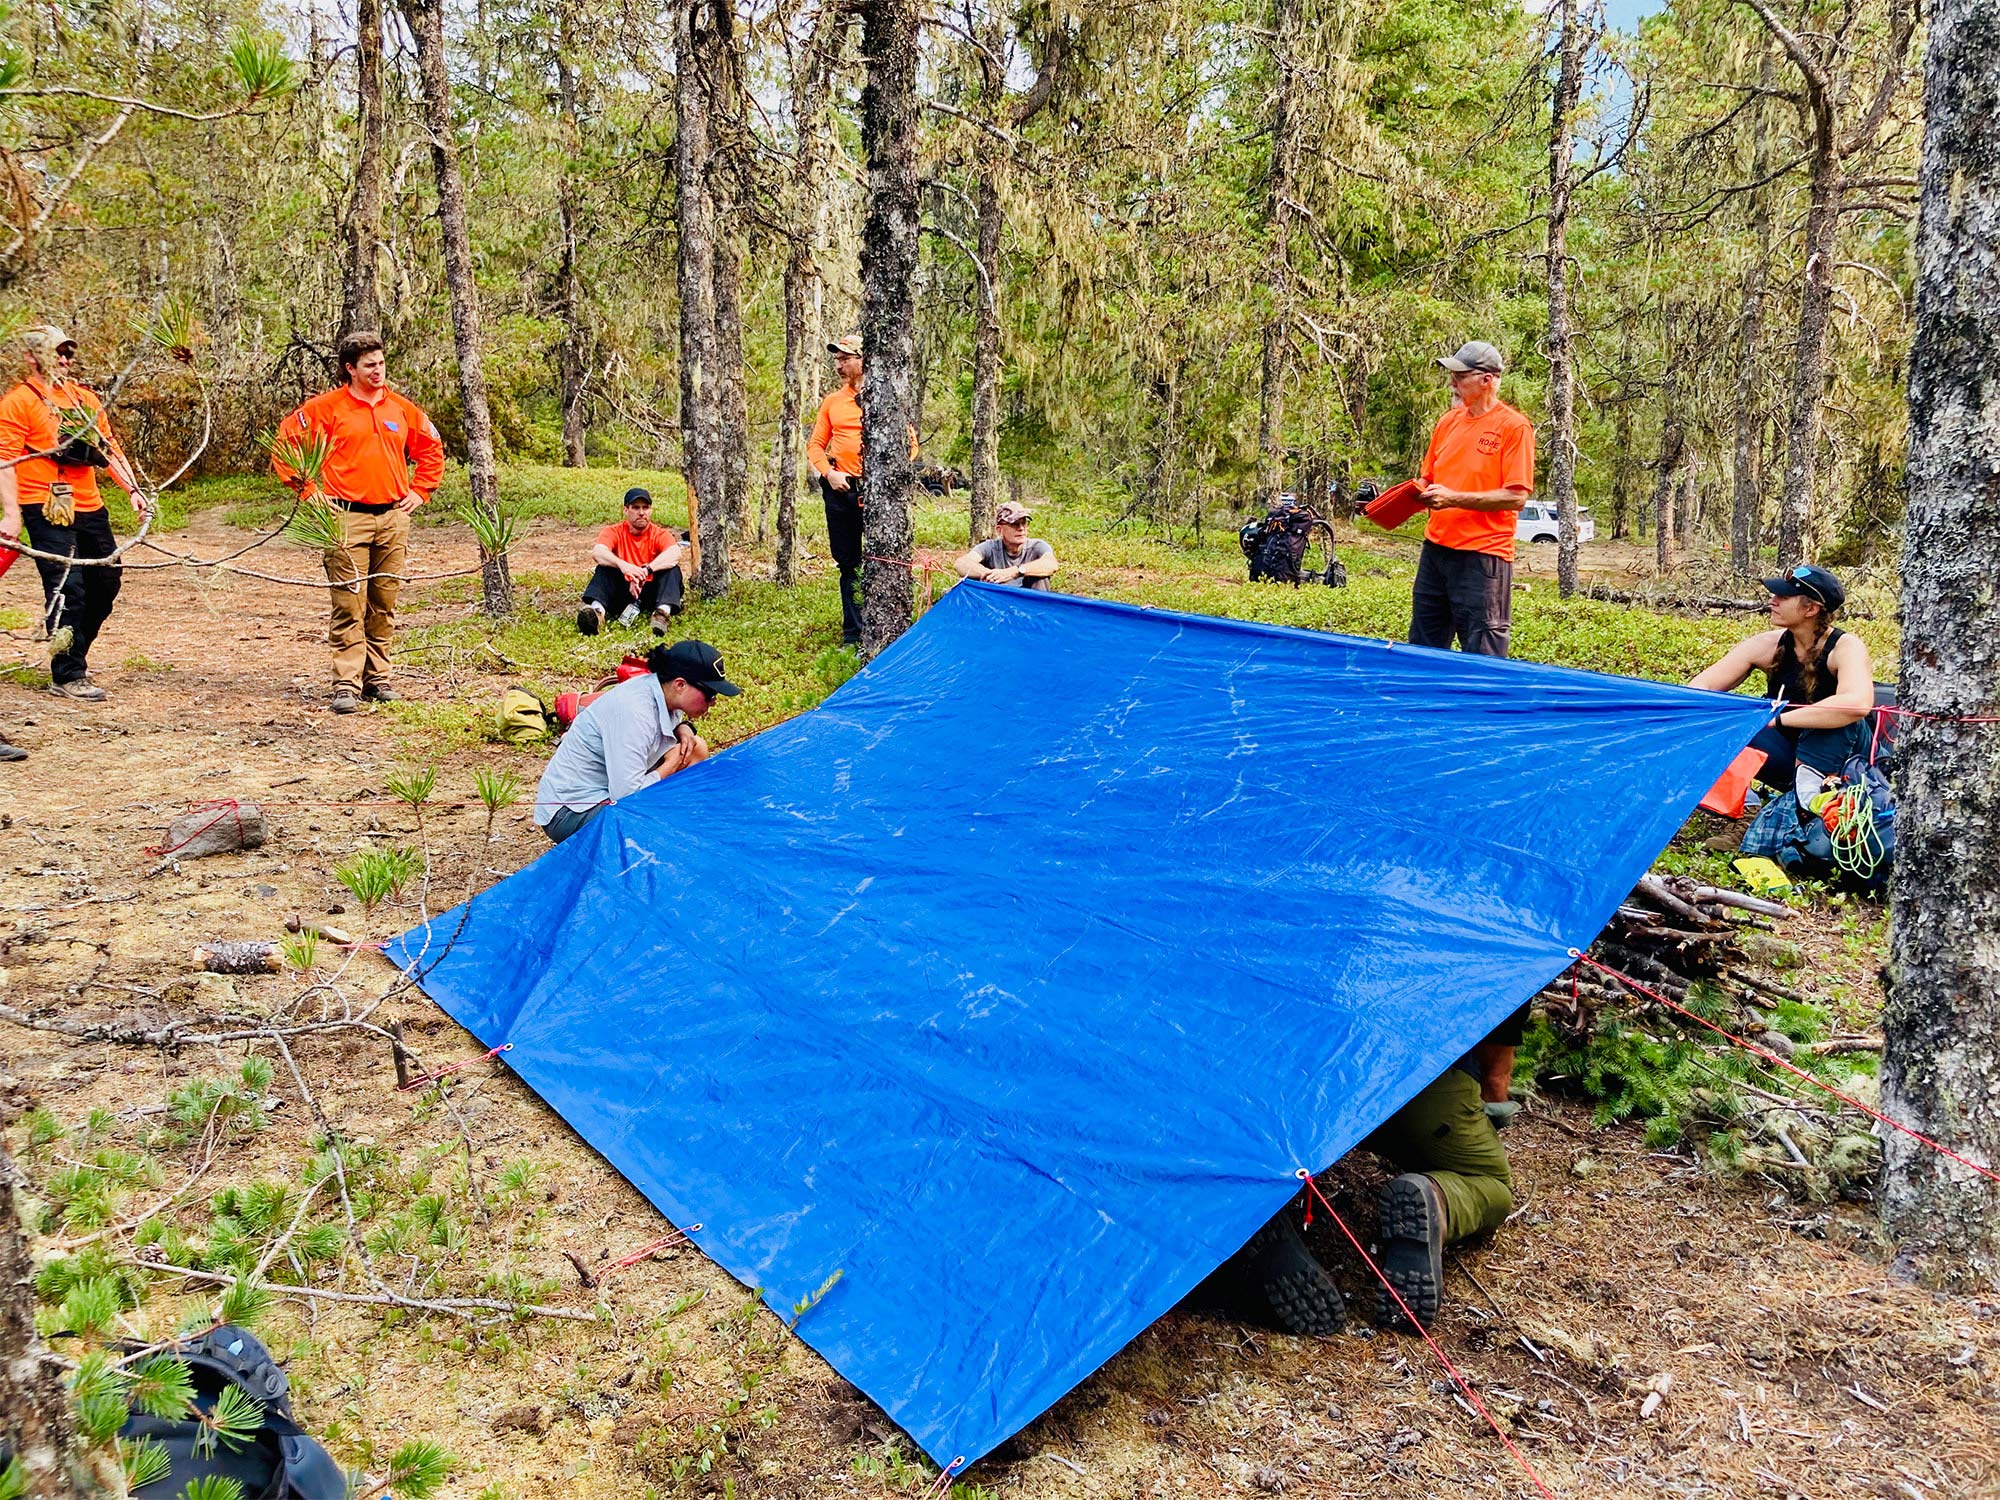 Several search and rescue members in the field examining a tarp shelter